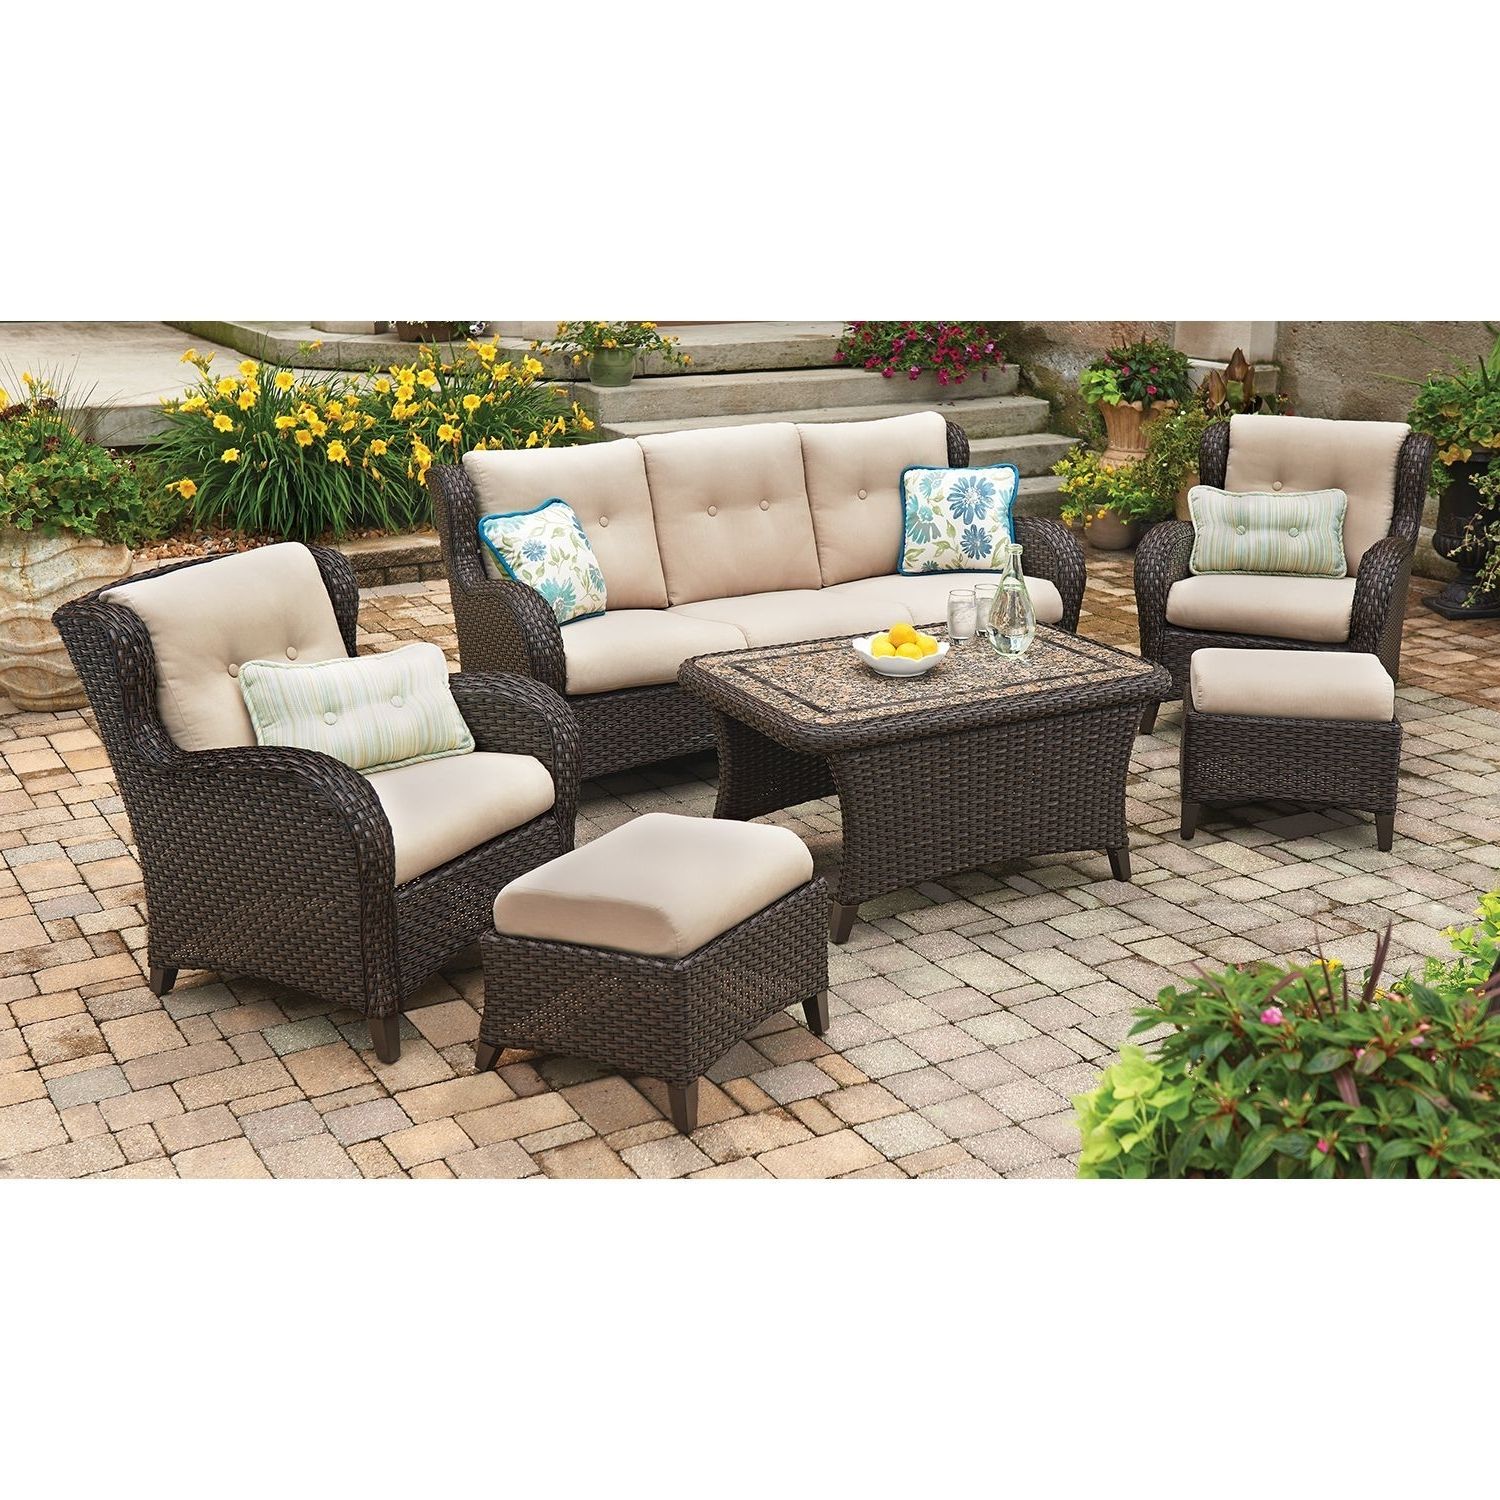 2017 Member's Mark Heritage 6 Piece Deep Seating Set With Premium With Patio Conversation Sets At Sam's Club (View 1 of 15)